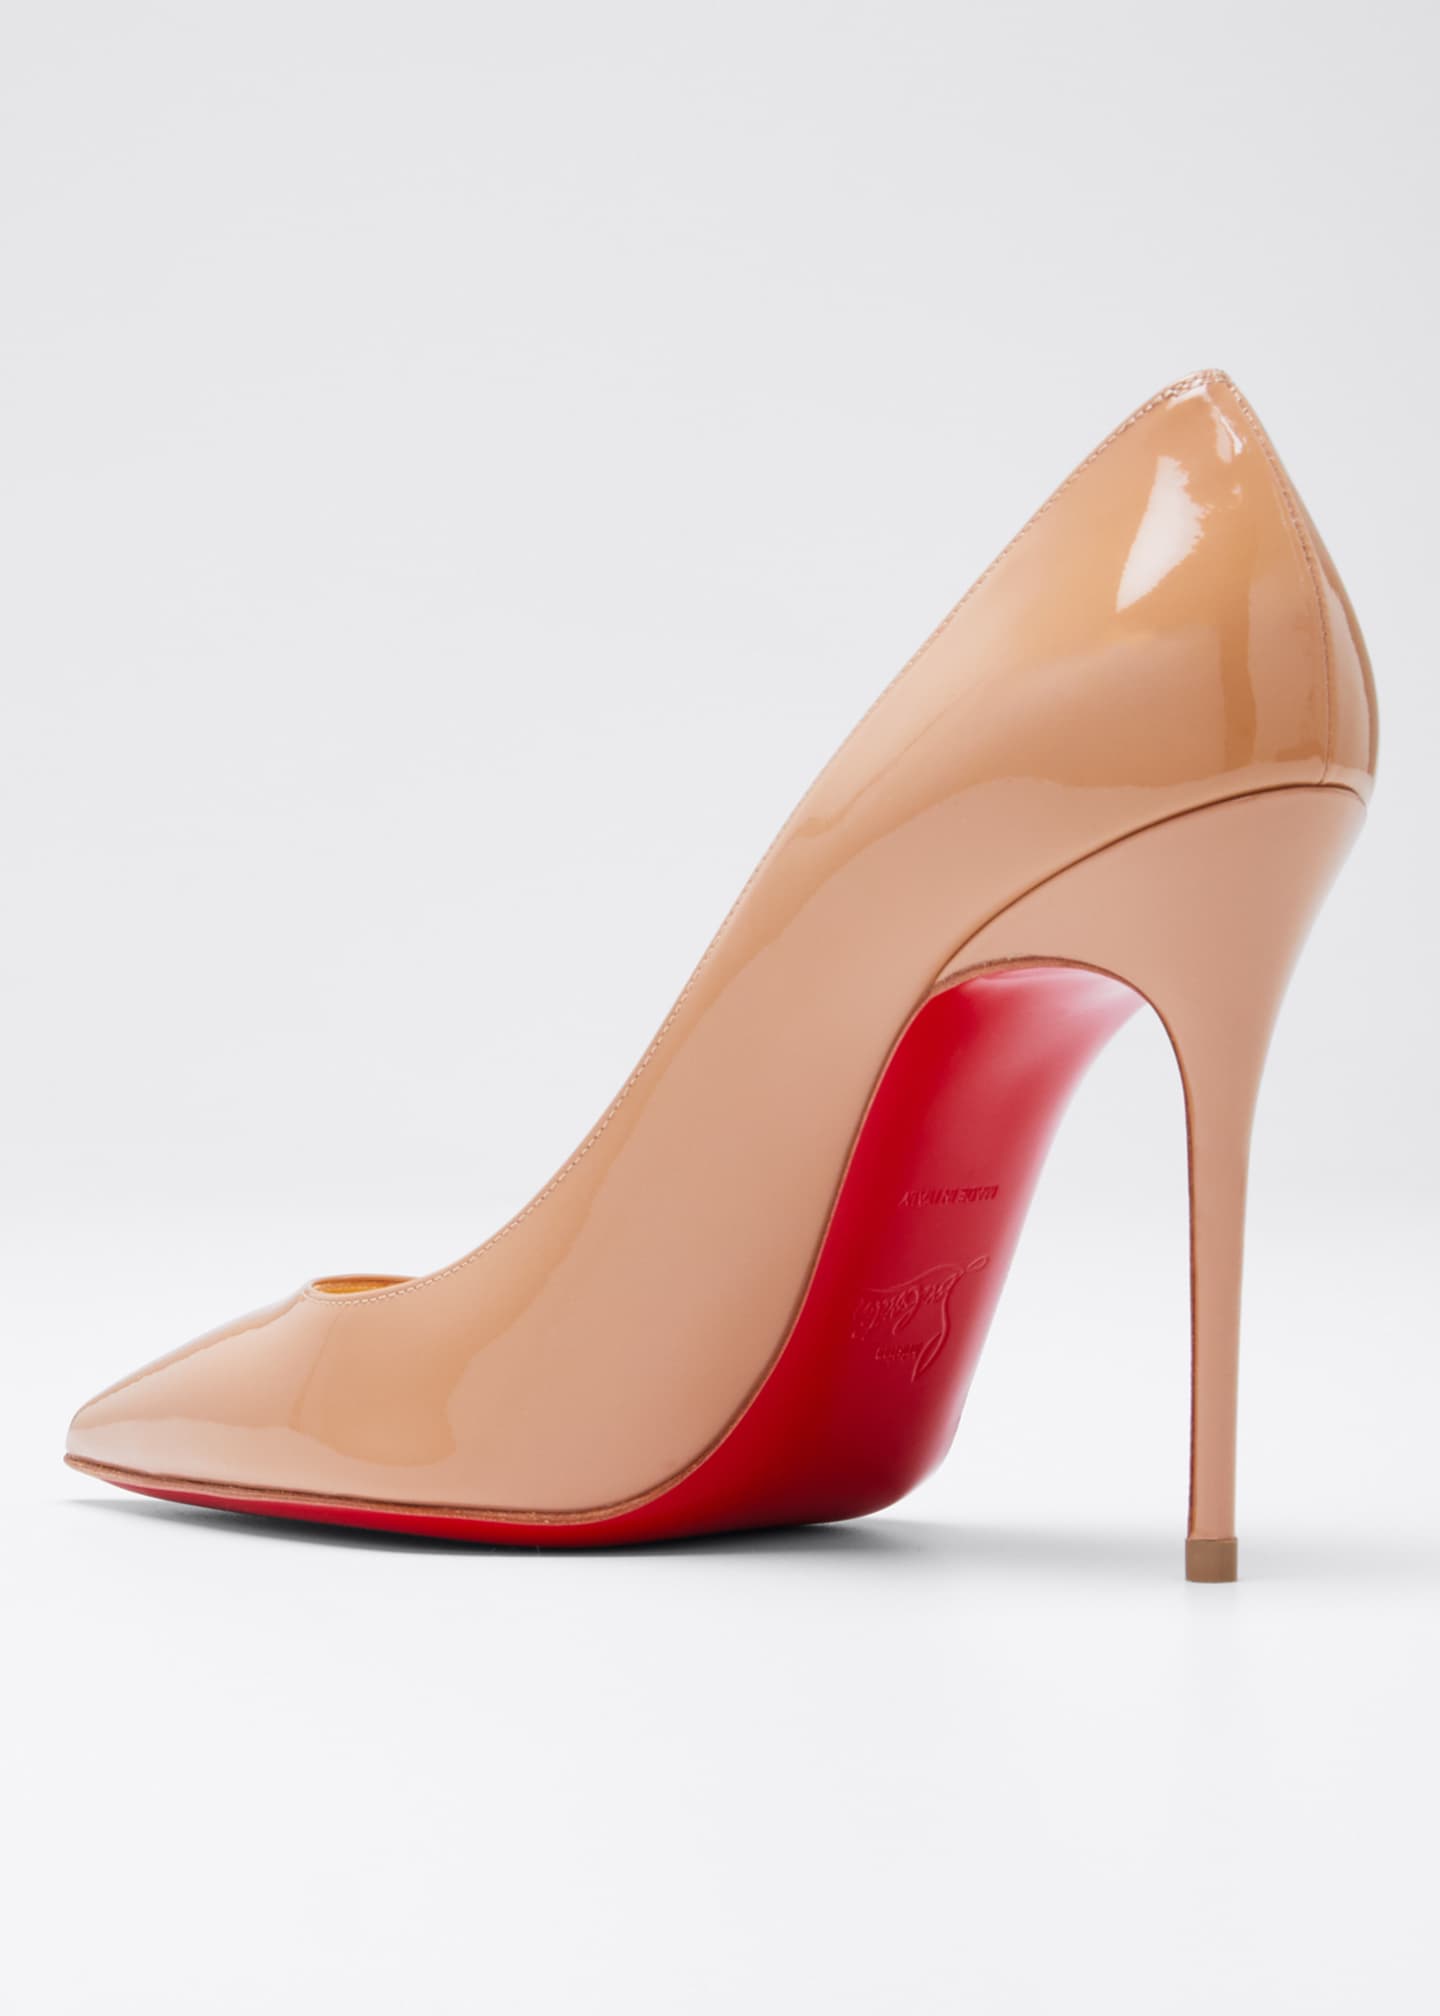 Christian Louboutin Decollette Pointed-Toe Red Sole Pump - Bergdorf Goodman